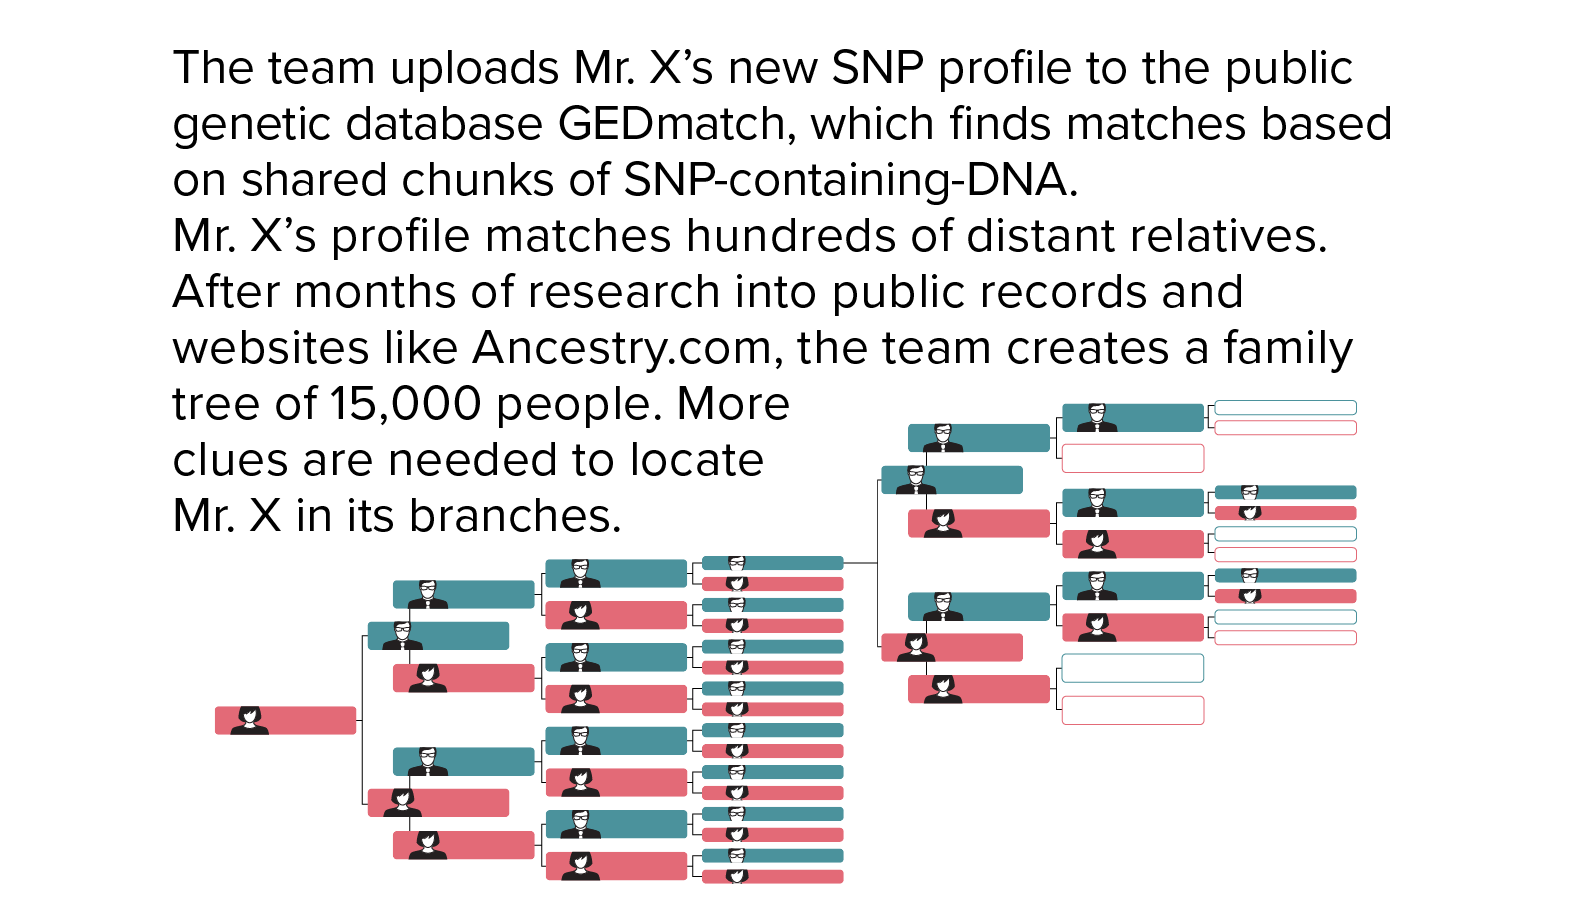 The team uploads Mr. X’s SNP profile to the public genetic database GEDmatch, which finds matches based on shared chunks of SNP-containing-DNA. Mr. X’s profile matches hundreds of distant relatives. After months of research into public records and websites like Ancestry.com, the team creates a family tree of 15,000 people. More clues are needed to locate Mr. X in its branches.